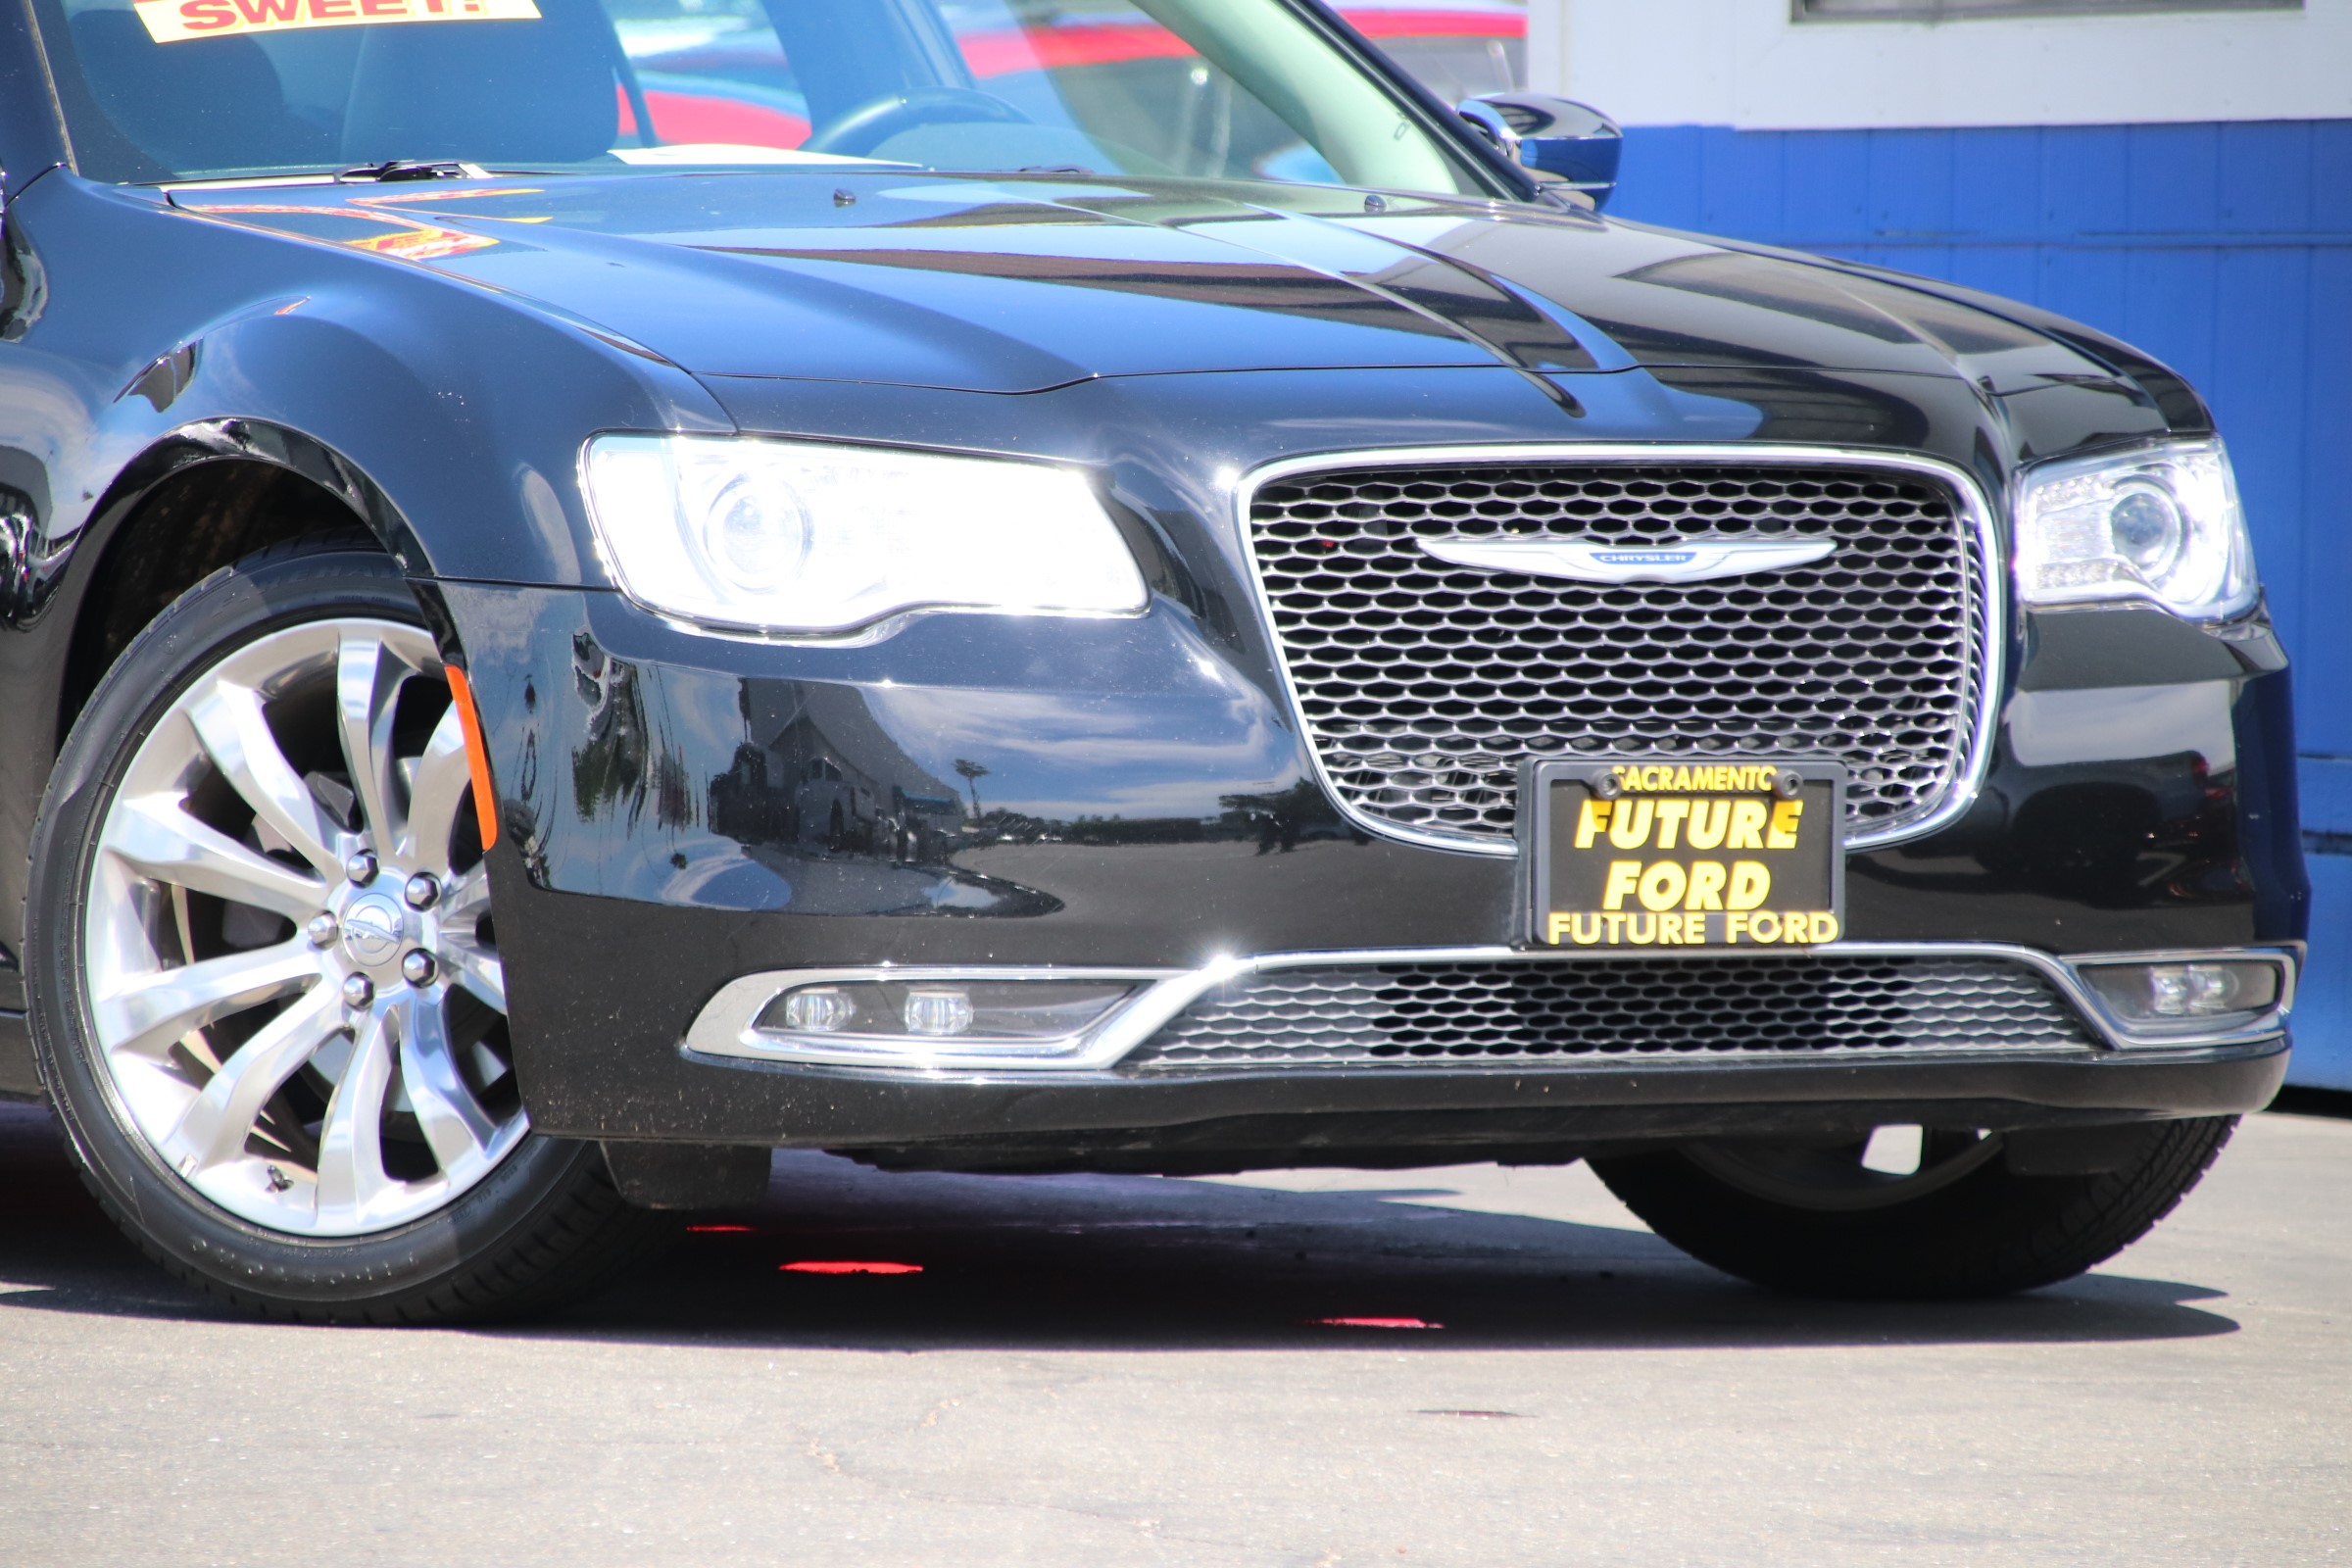 PreOwned 2019 Chrysler 300 Limited Limited in Roseville 